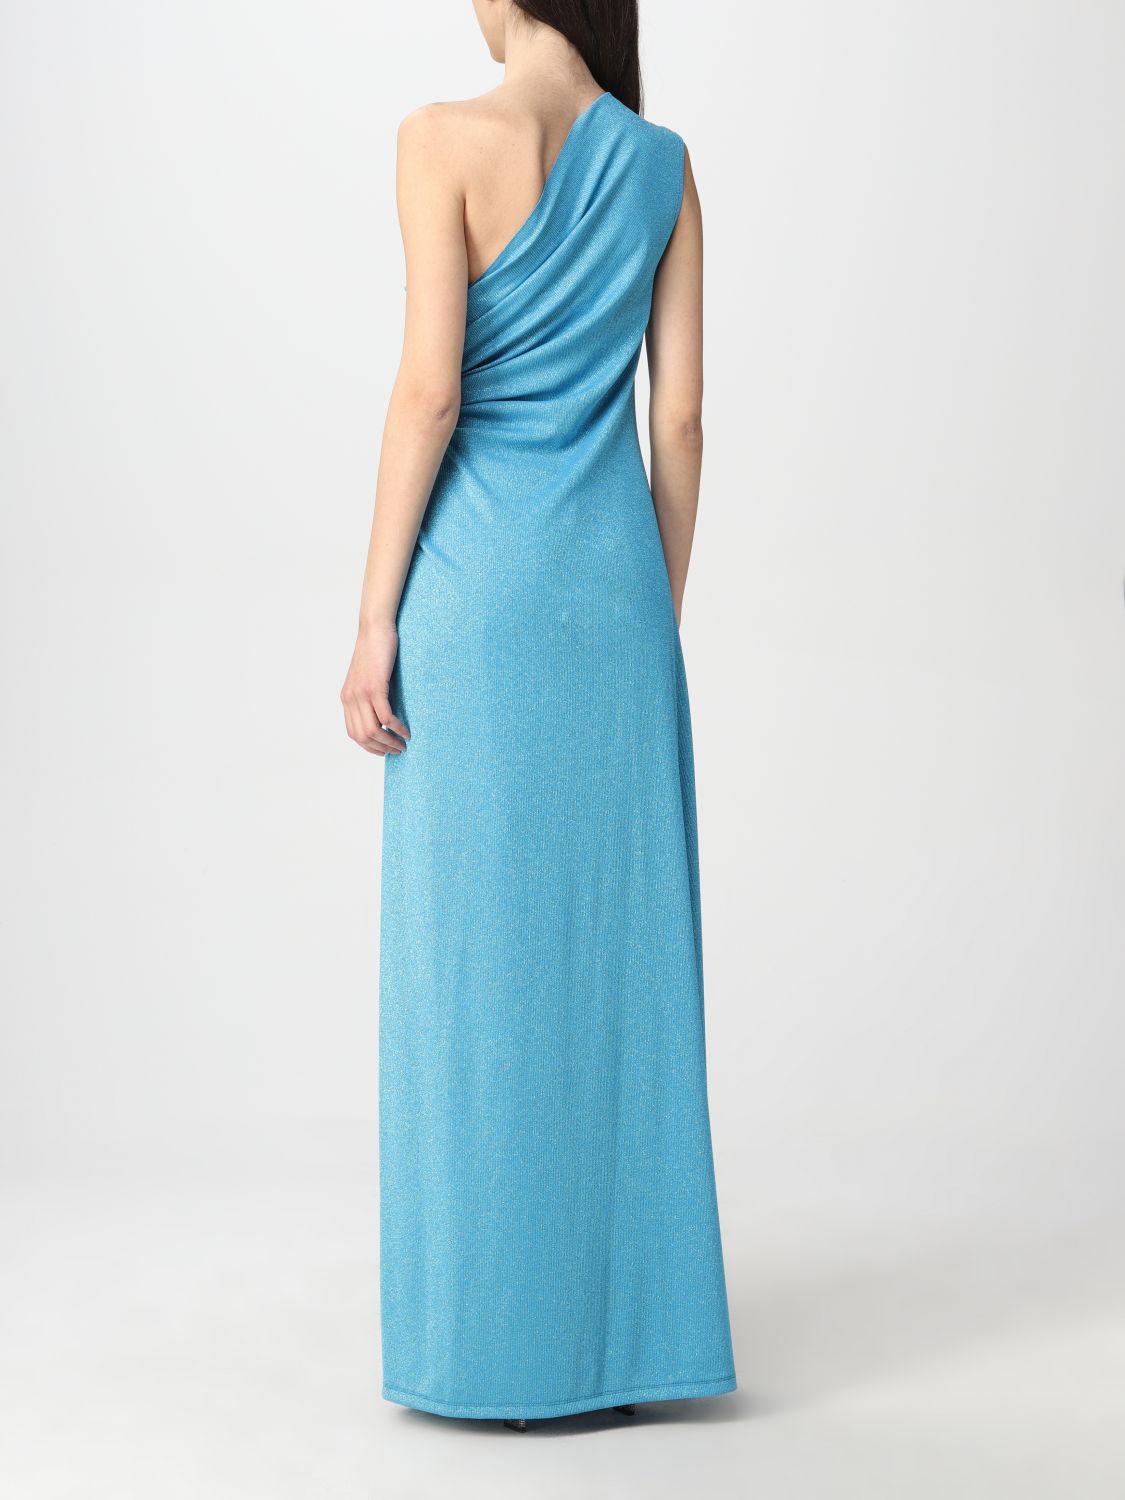 Dress H Couture: Dress women H Couture turquoise 2